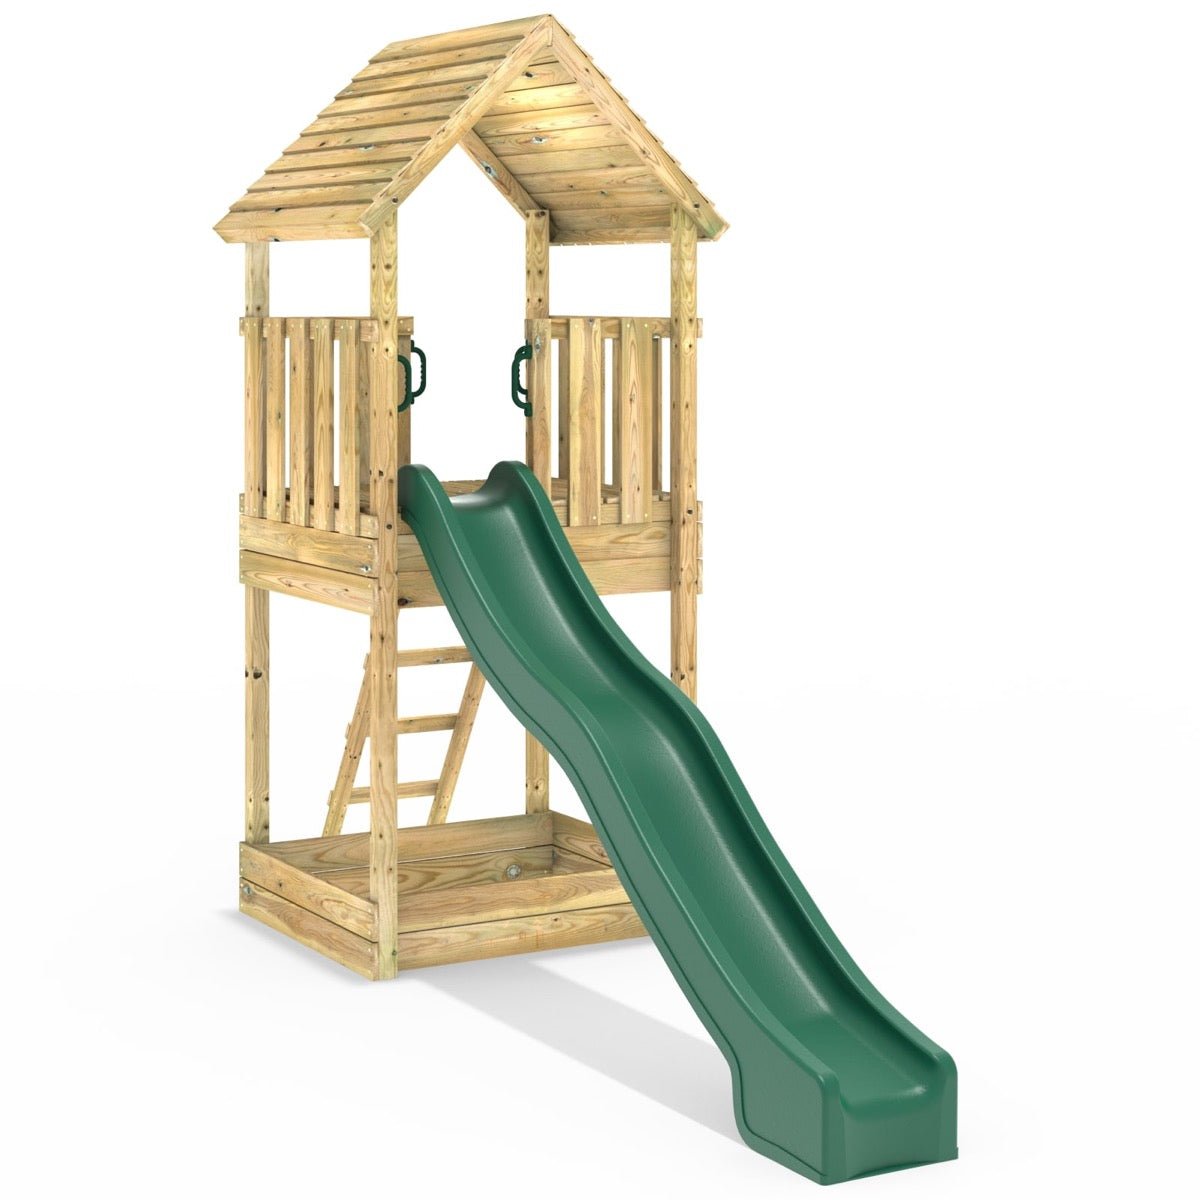 Rebo Modular Wooden Climbing Frame Adventure Playset - Tower with Wooden Roof